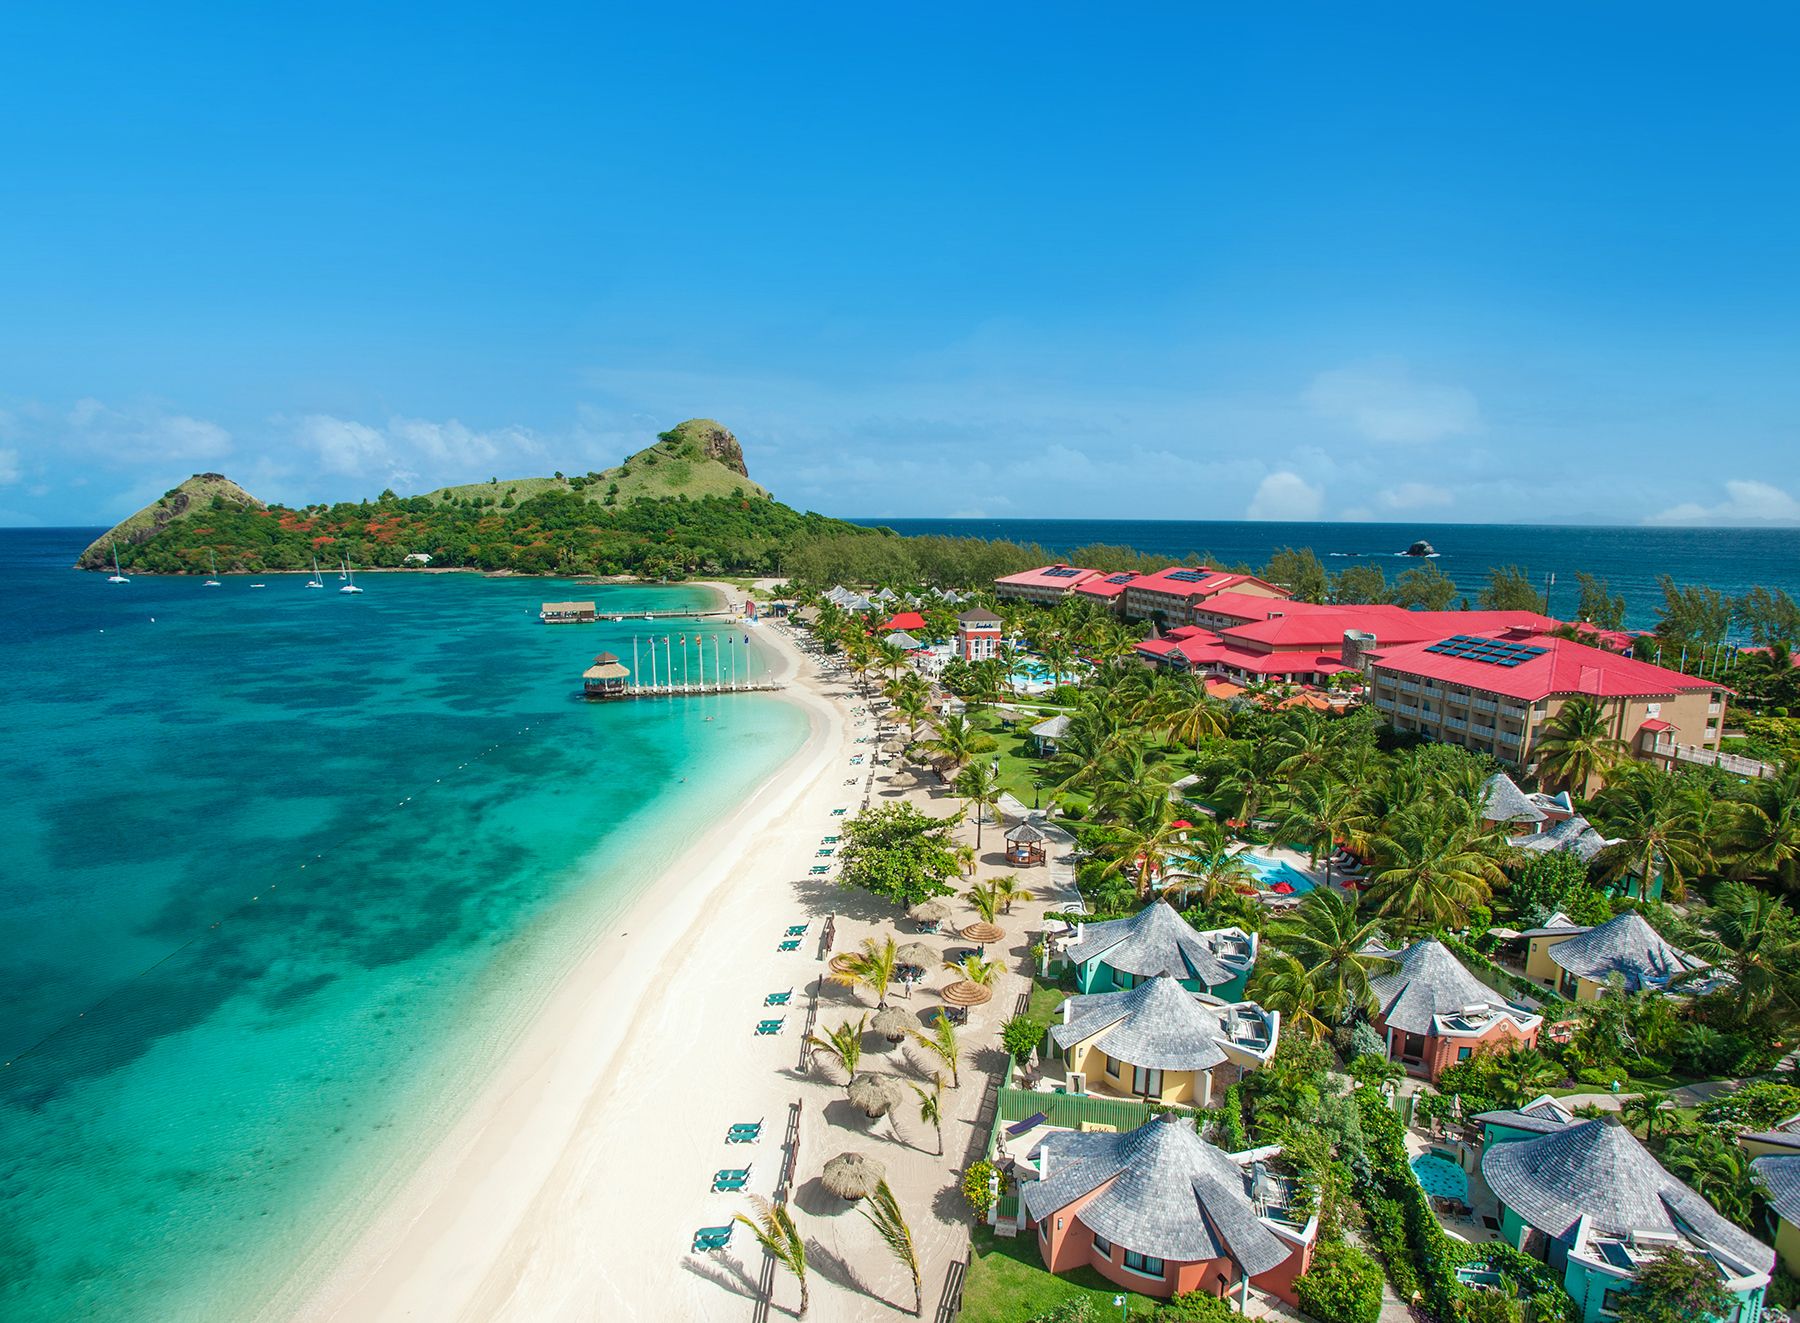 The Three Best-Rated Sandals Resorts in Saint Lucia of 2023 - Ranked